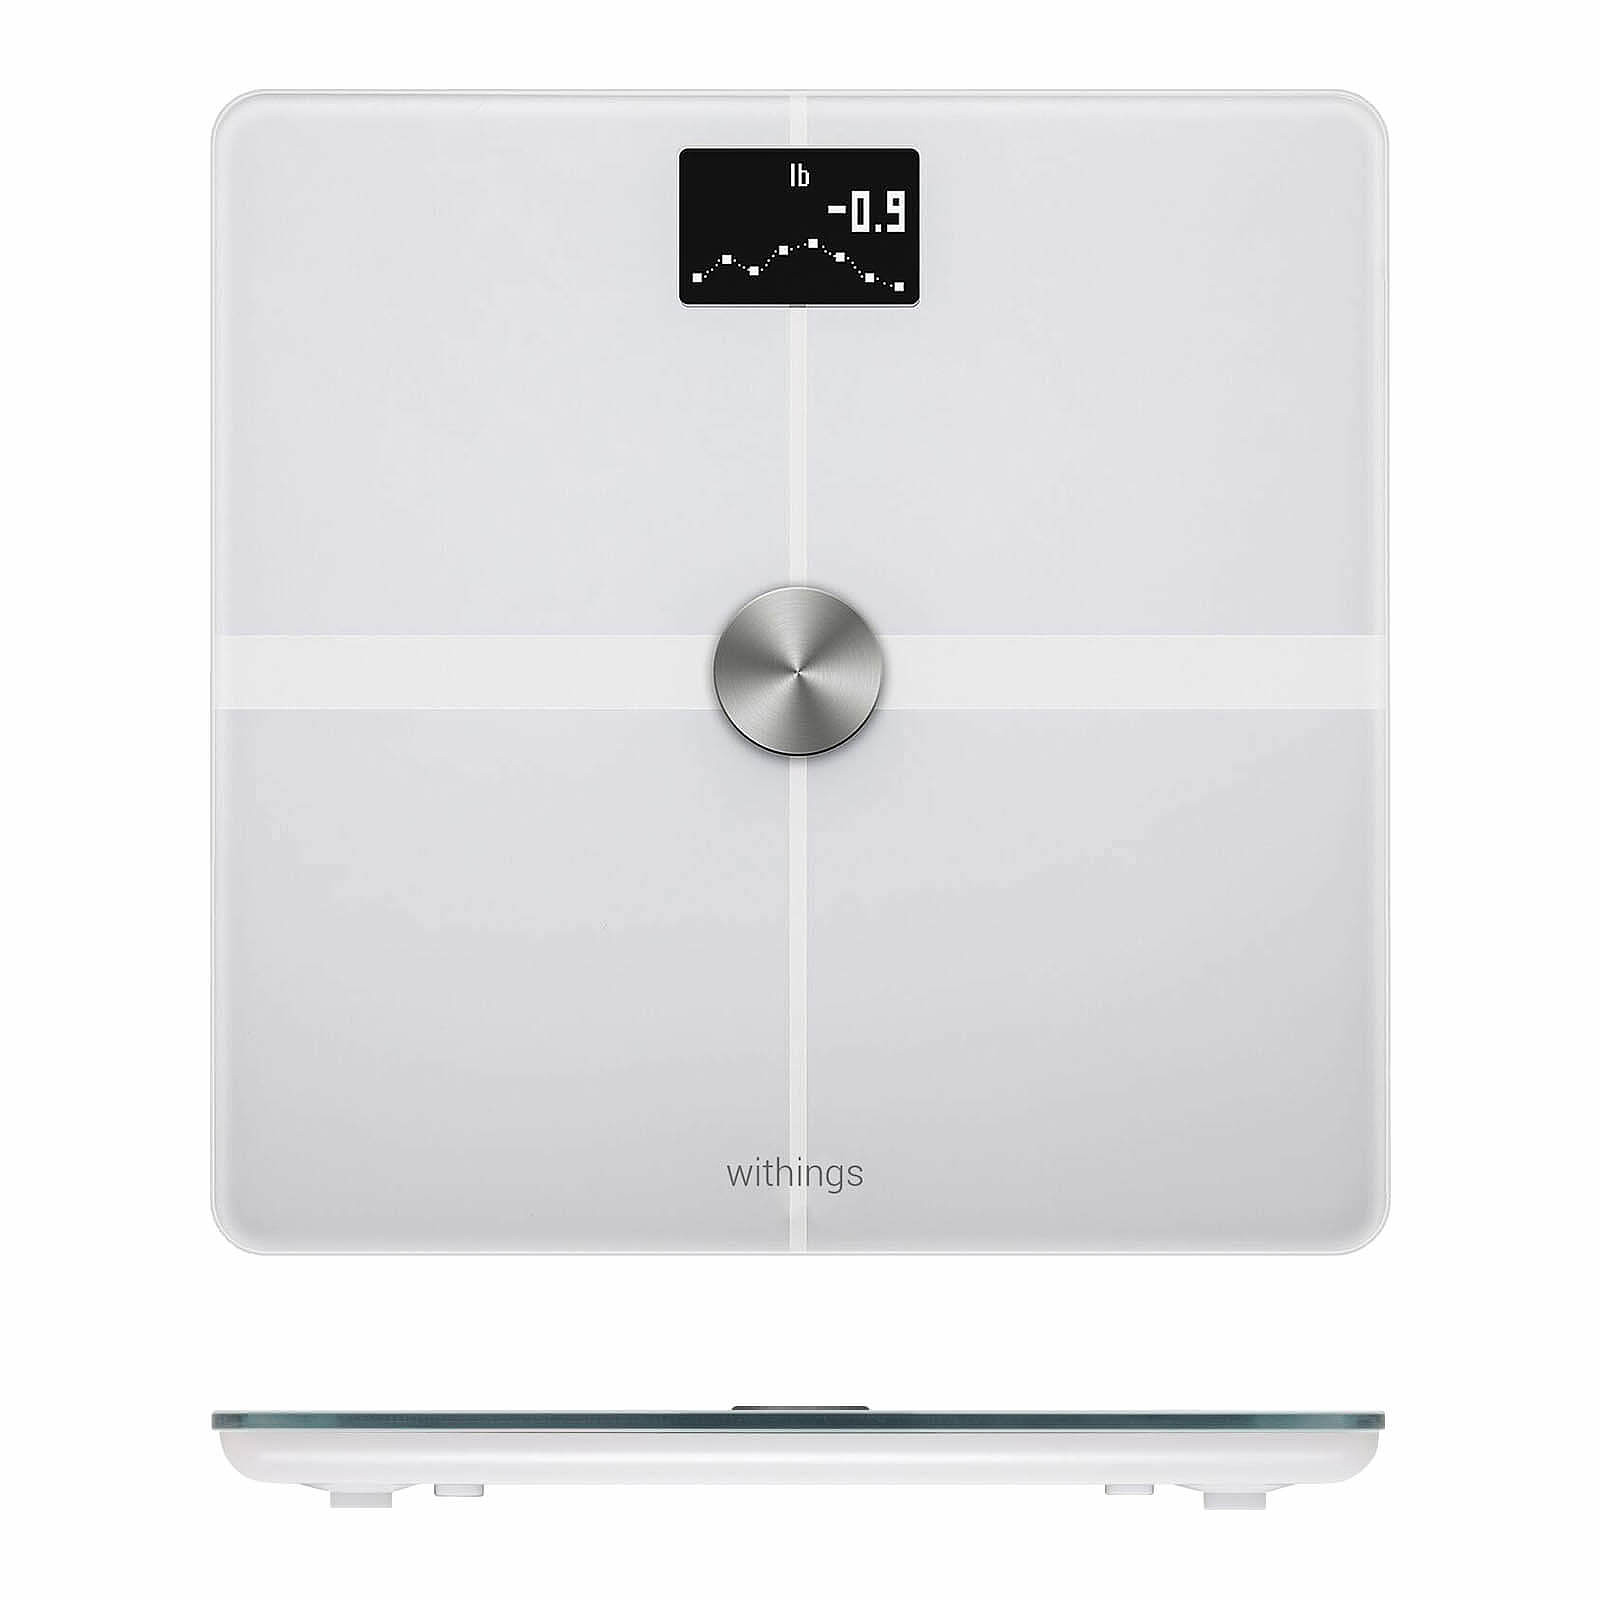 Withings Balance connectee Wifi et Bluetooth 8 Utilisateurs Body+ Blanc - Balance connectee Withings